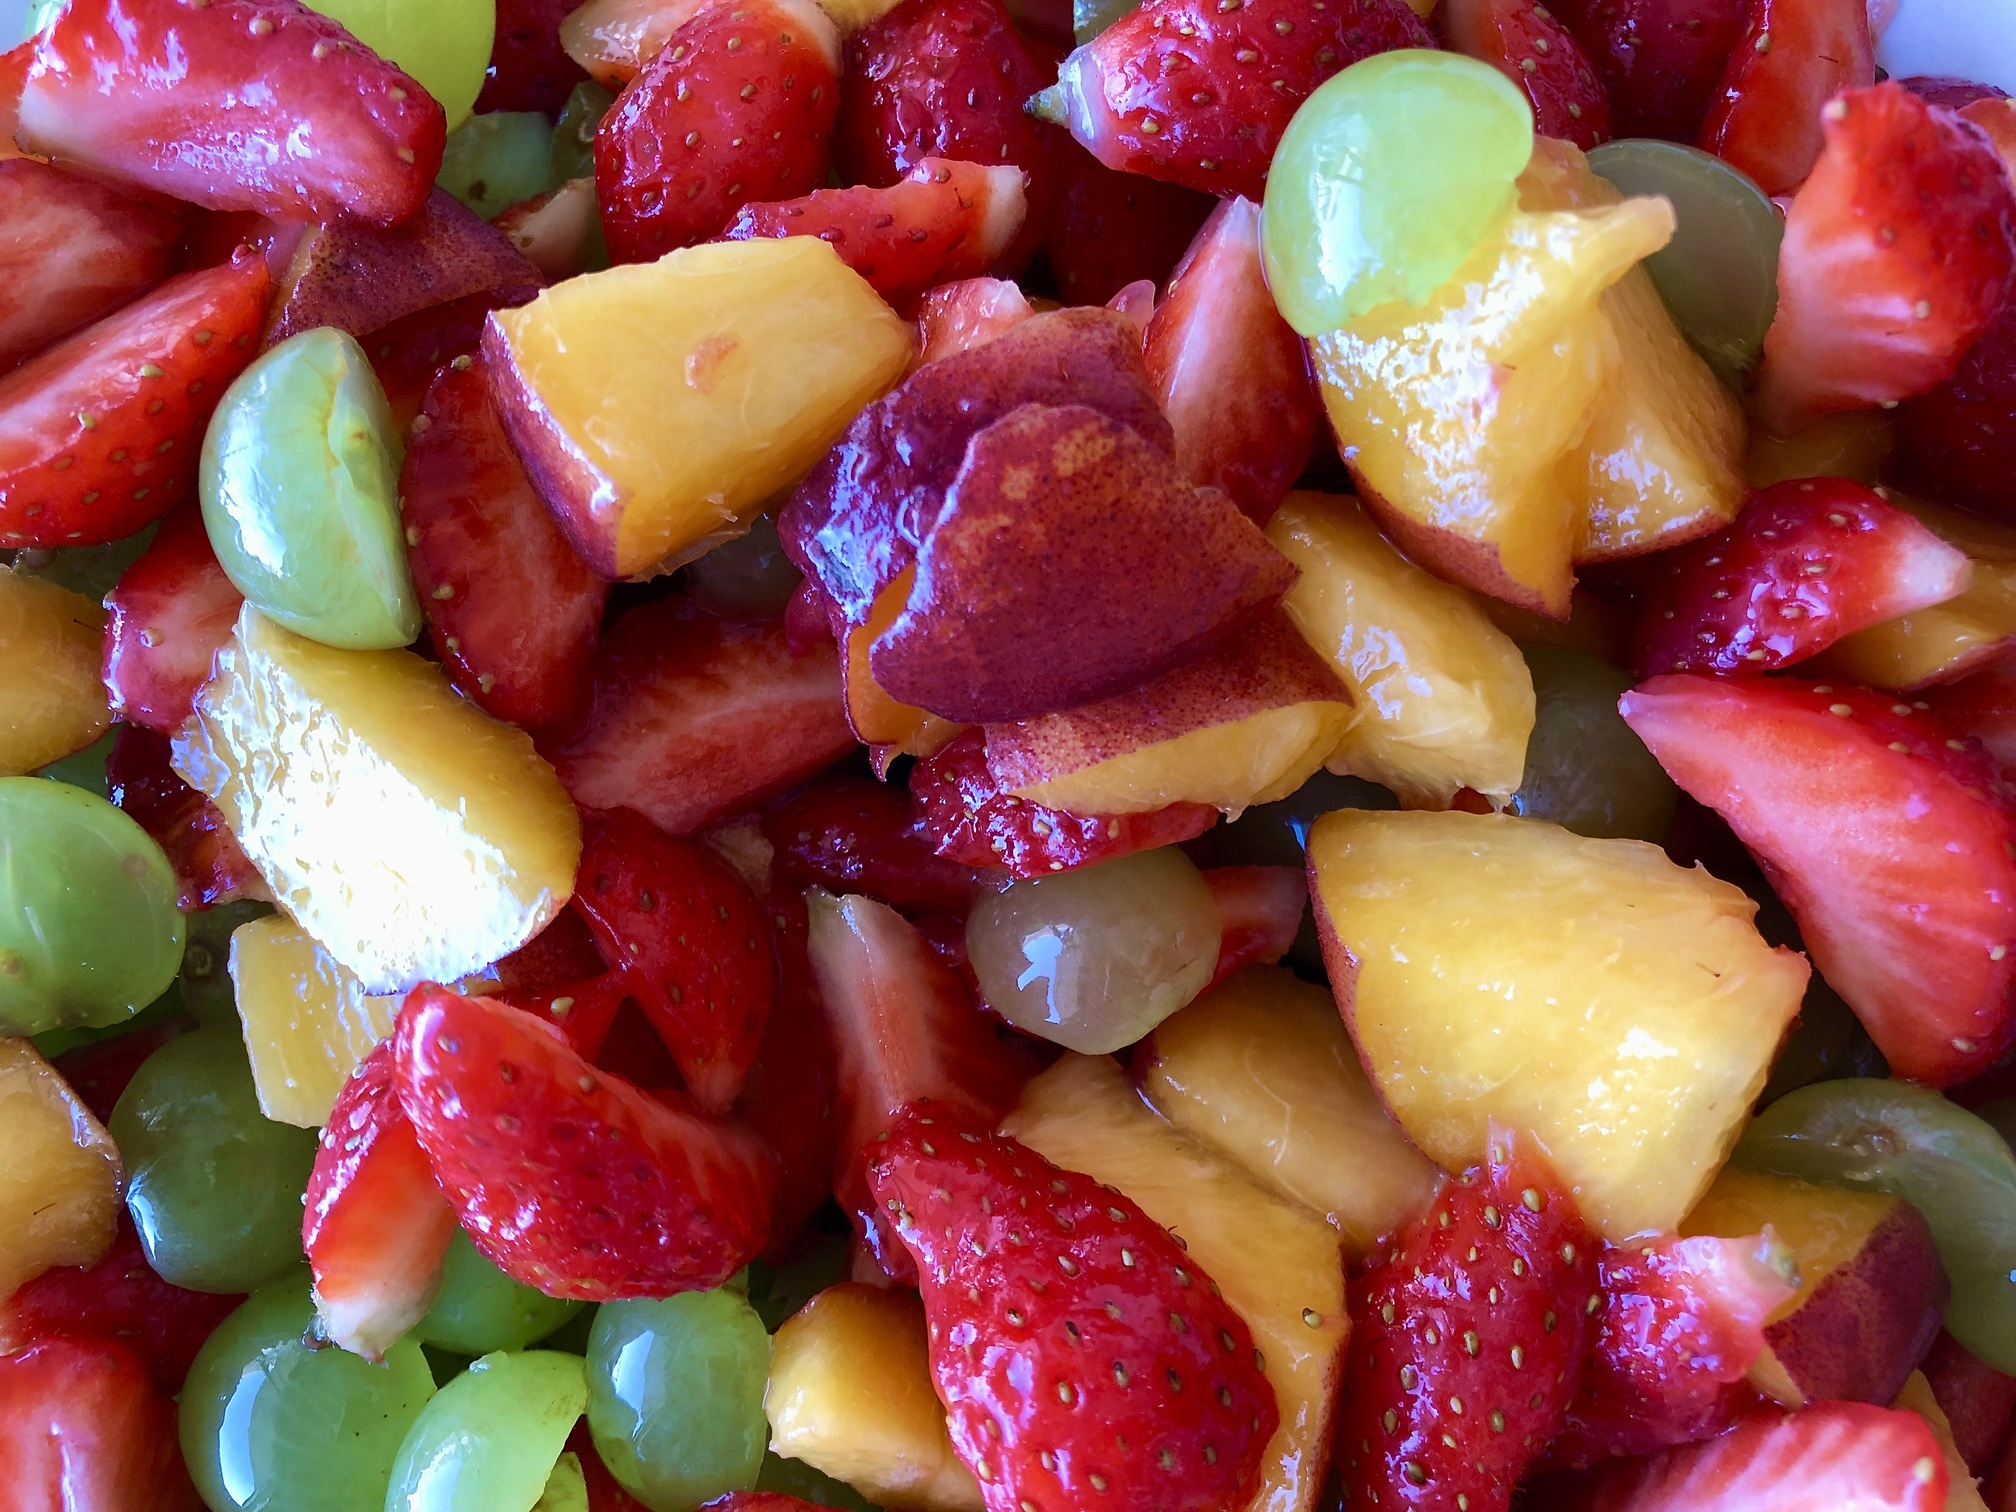 A close-up of fruit salad with strawberries, grapes, and peaches.